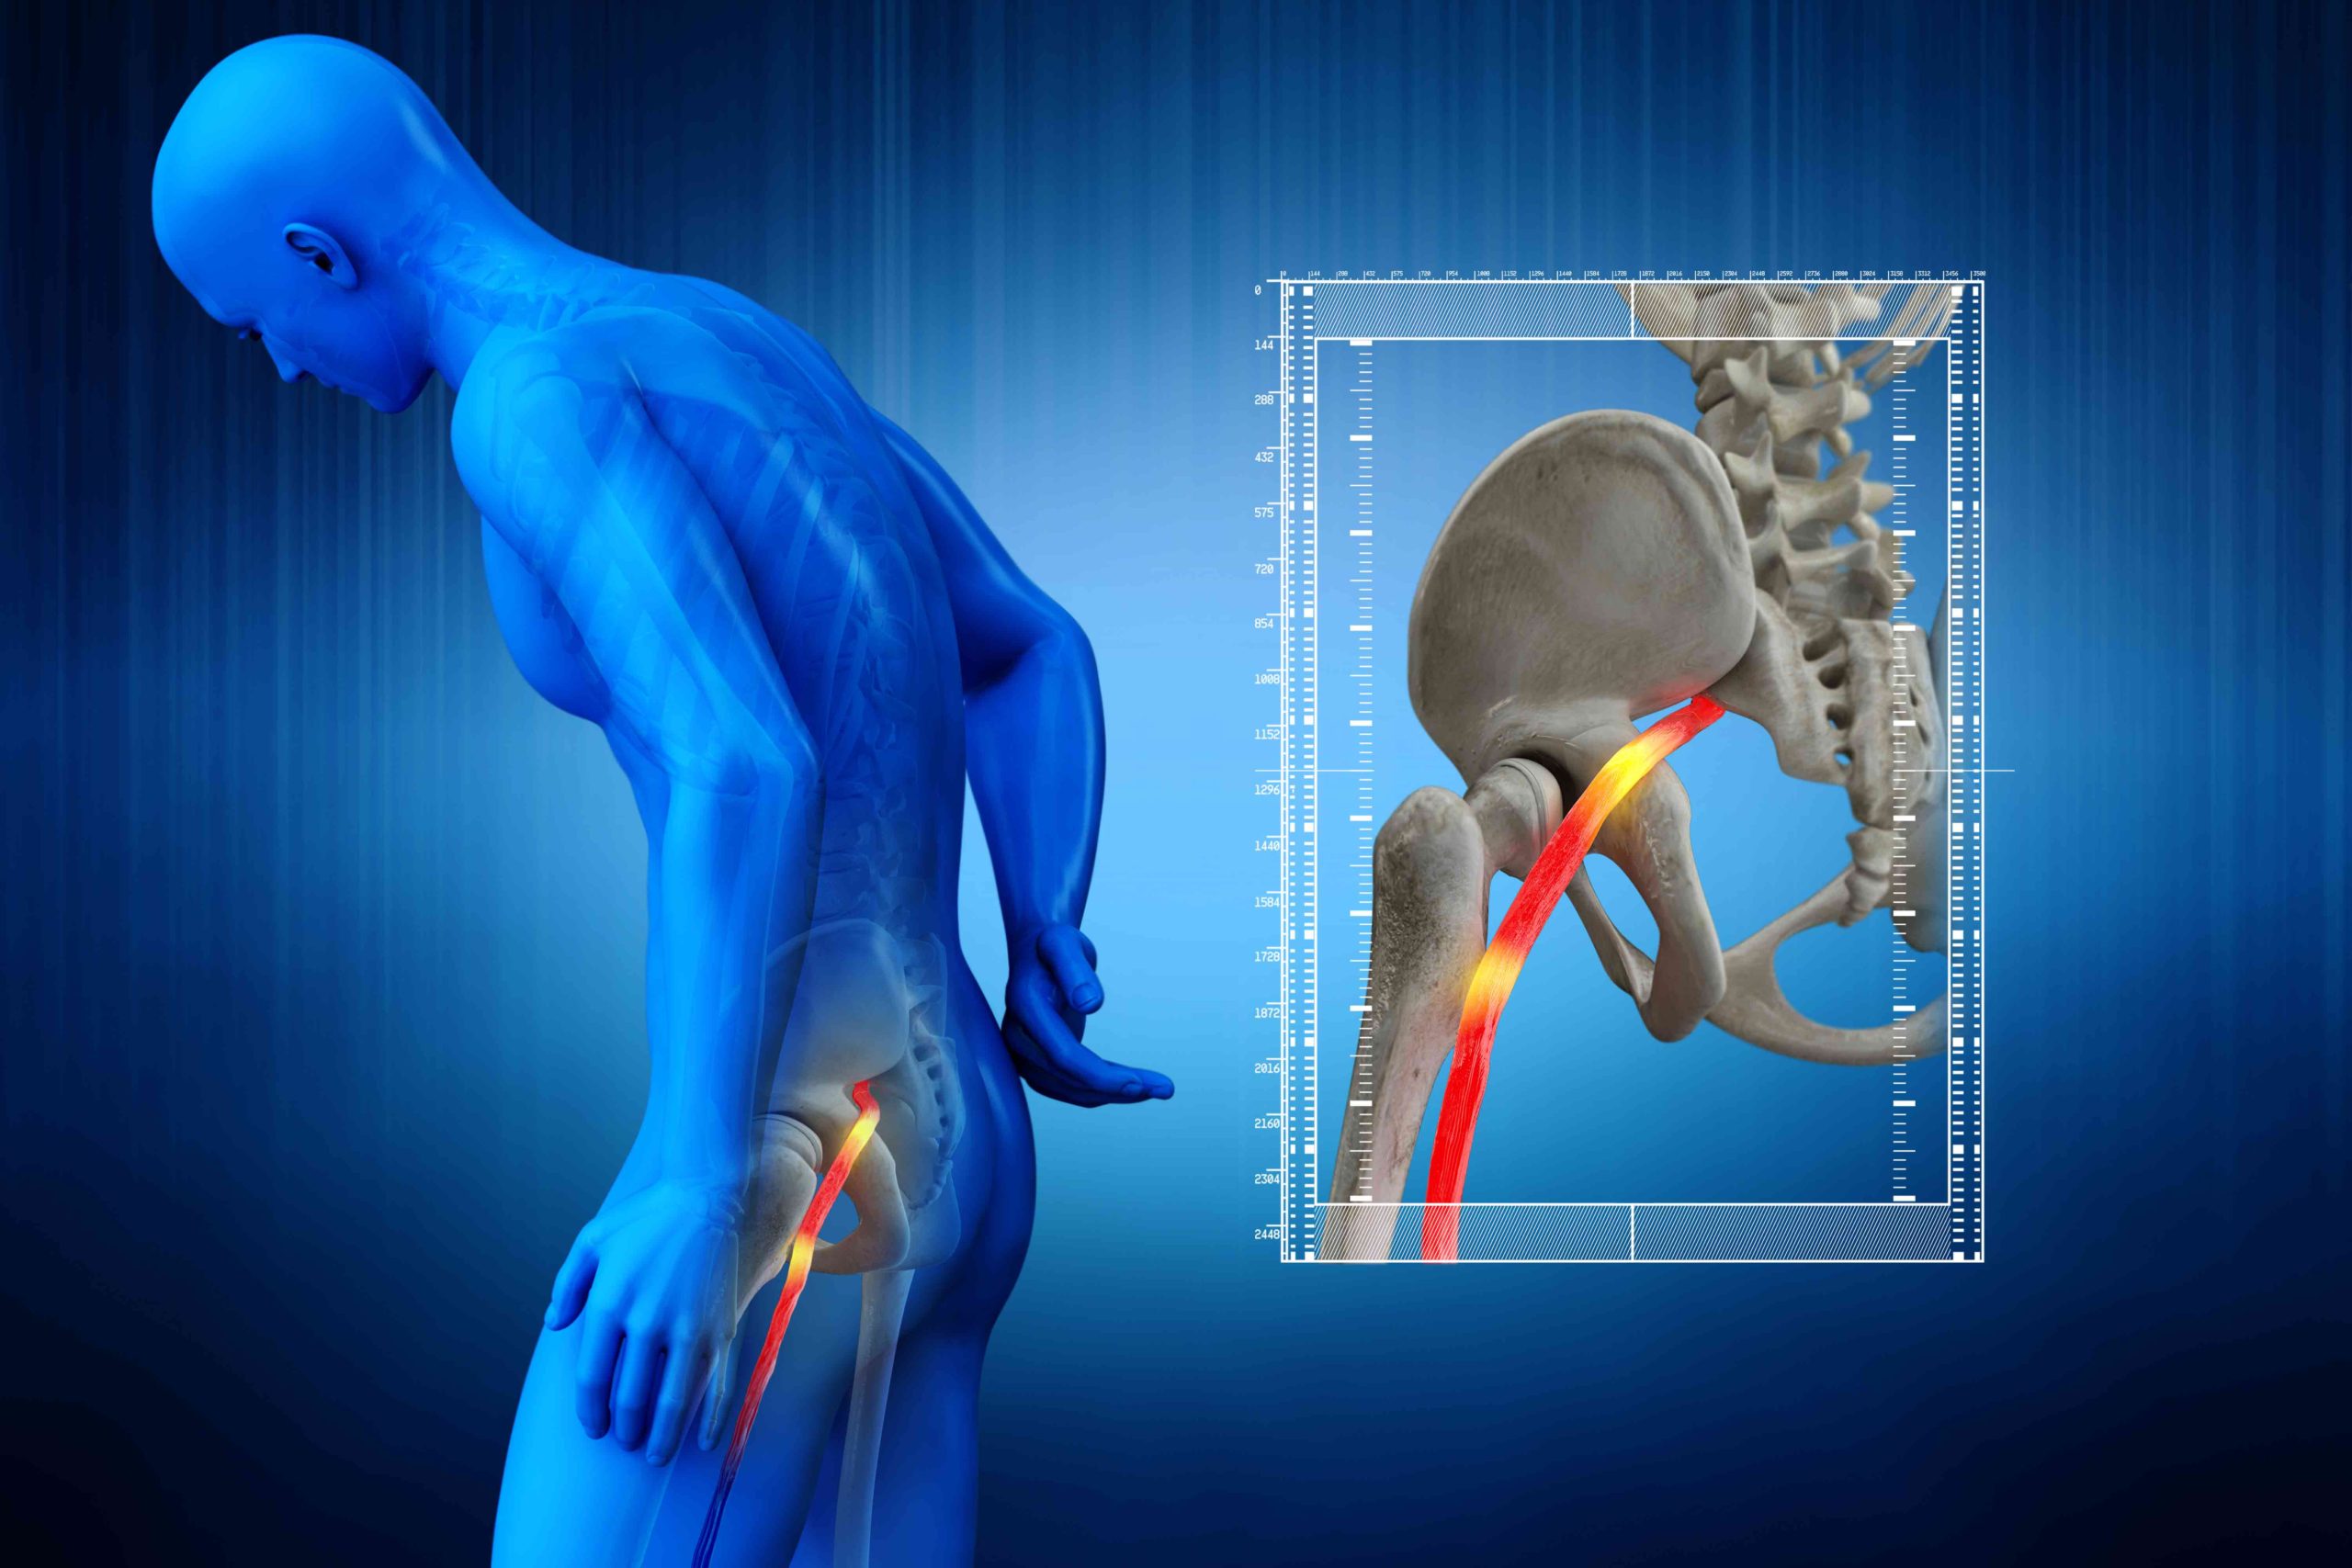 image showing the sciatic nerve which runs down the leg